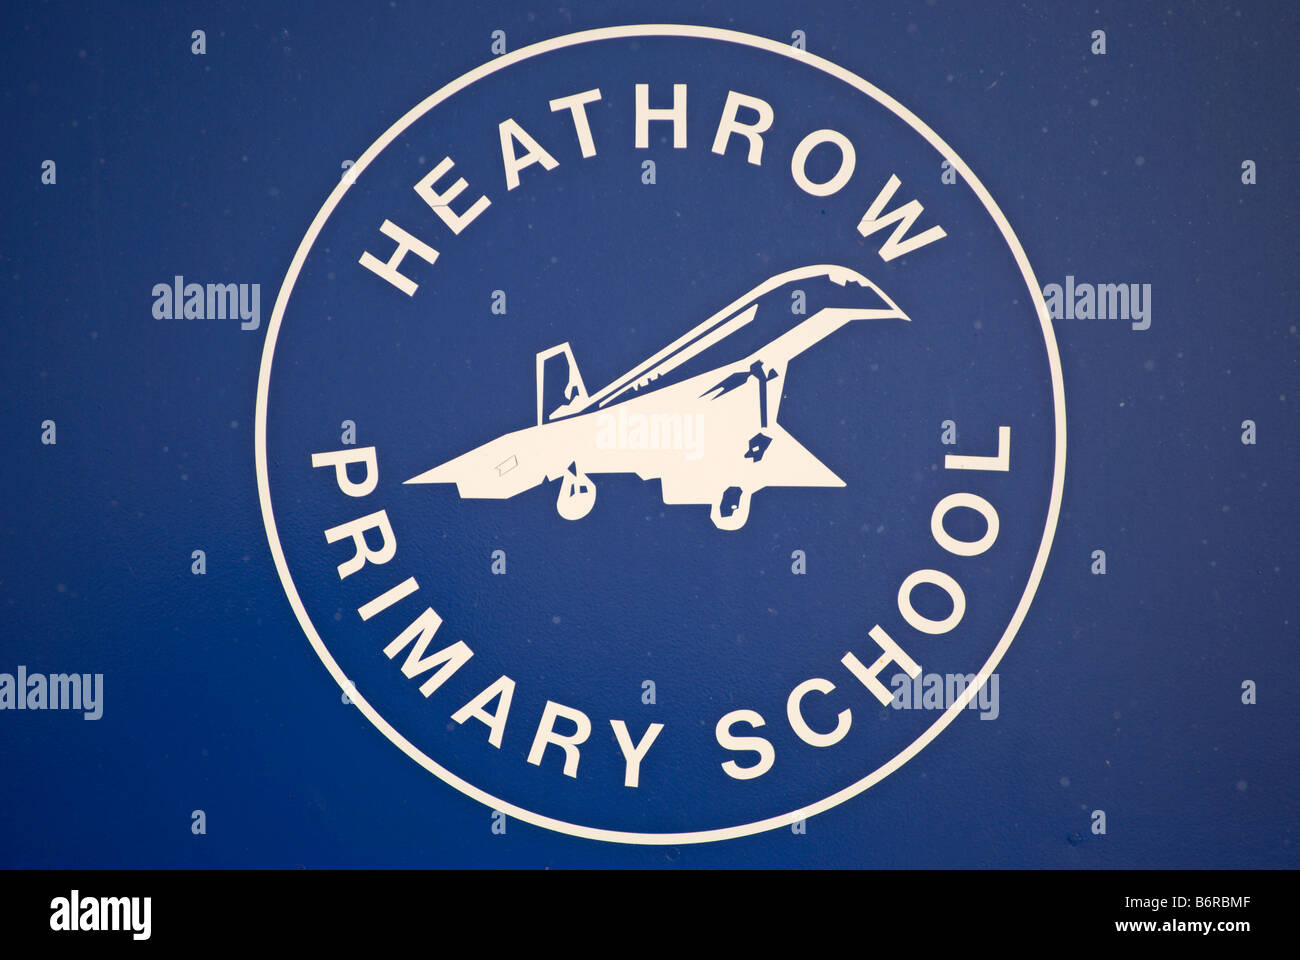 logo of heathrow primary school, near heathrow airport, london, england, a school threatened by airport expansion Stock Photo